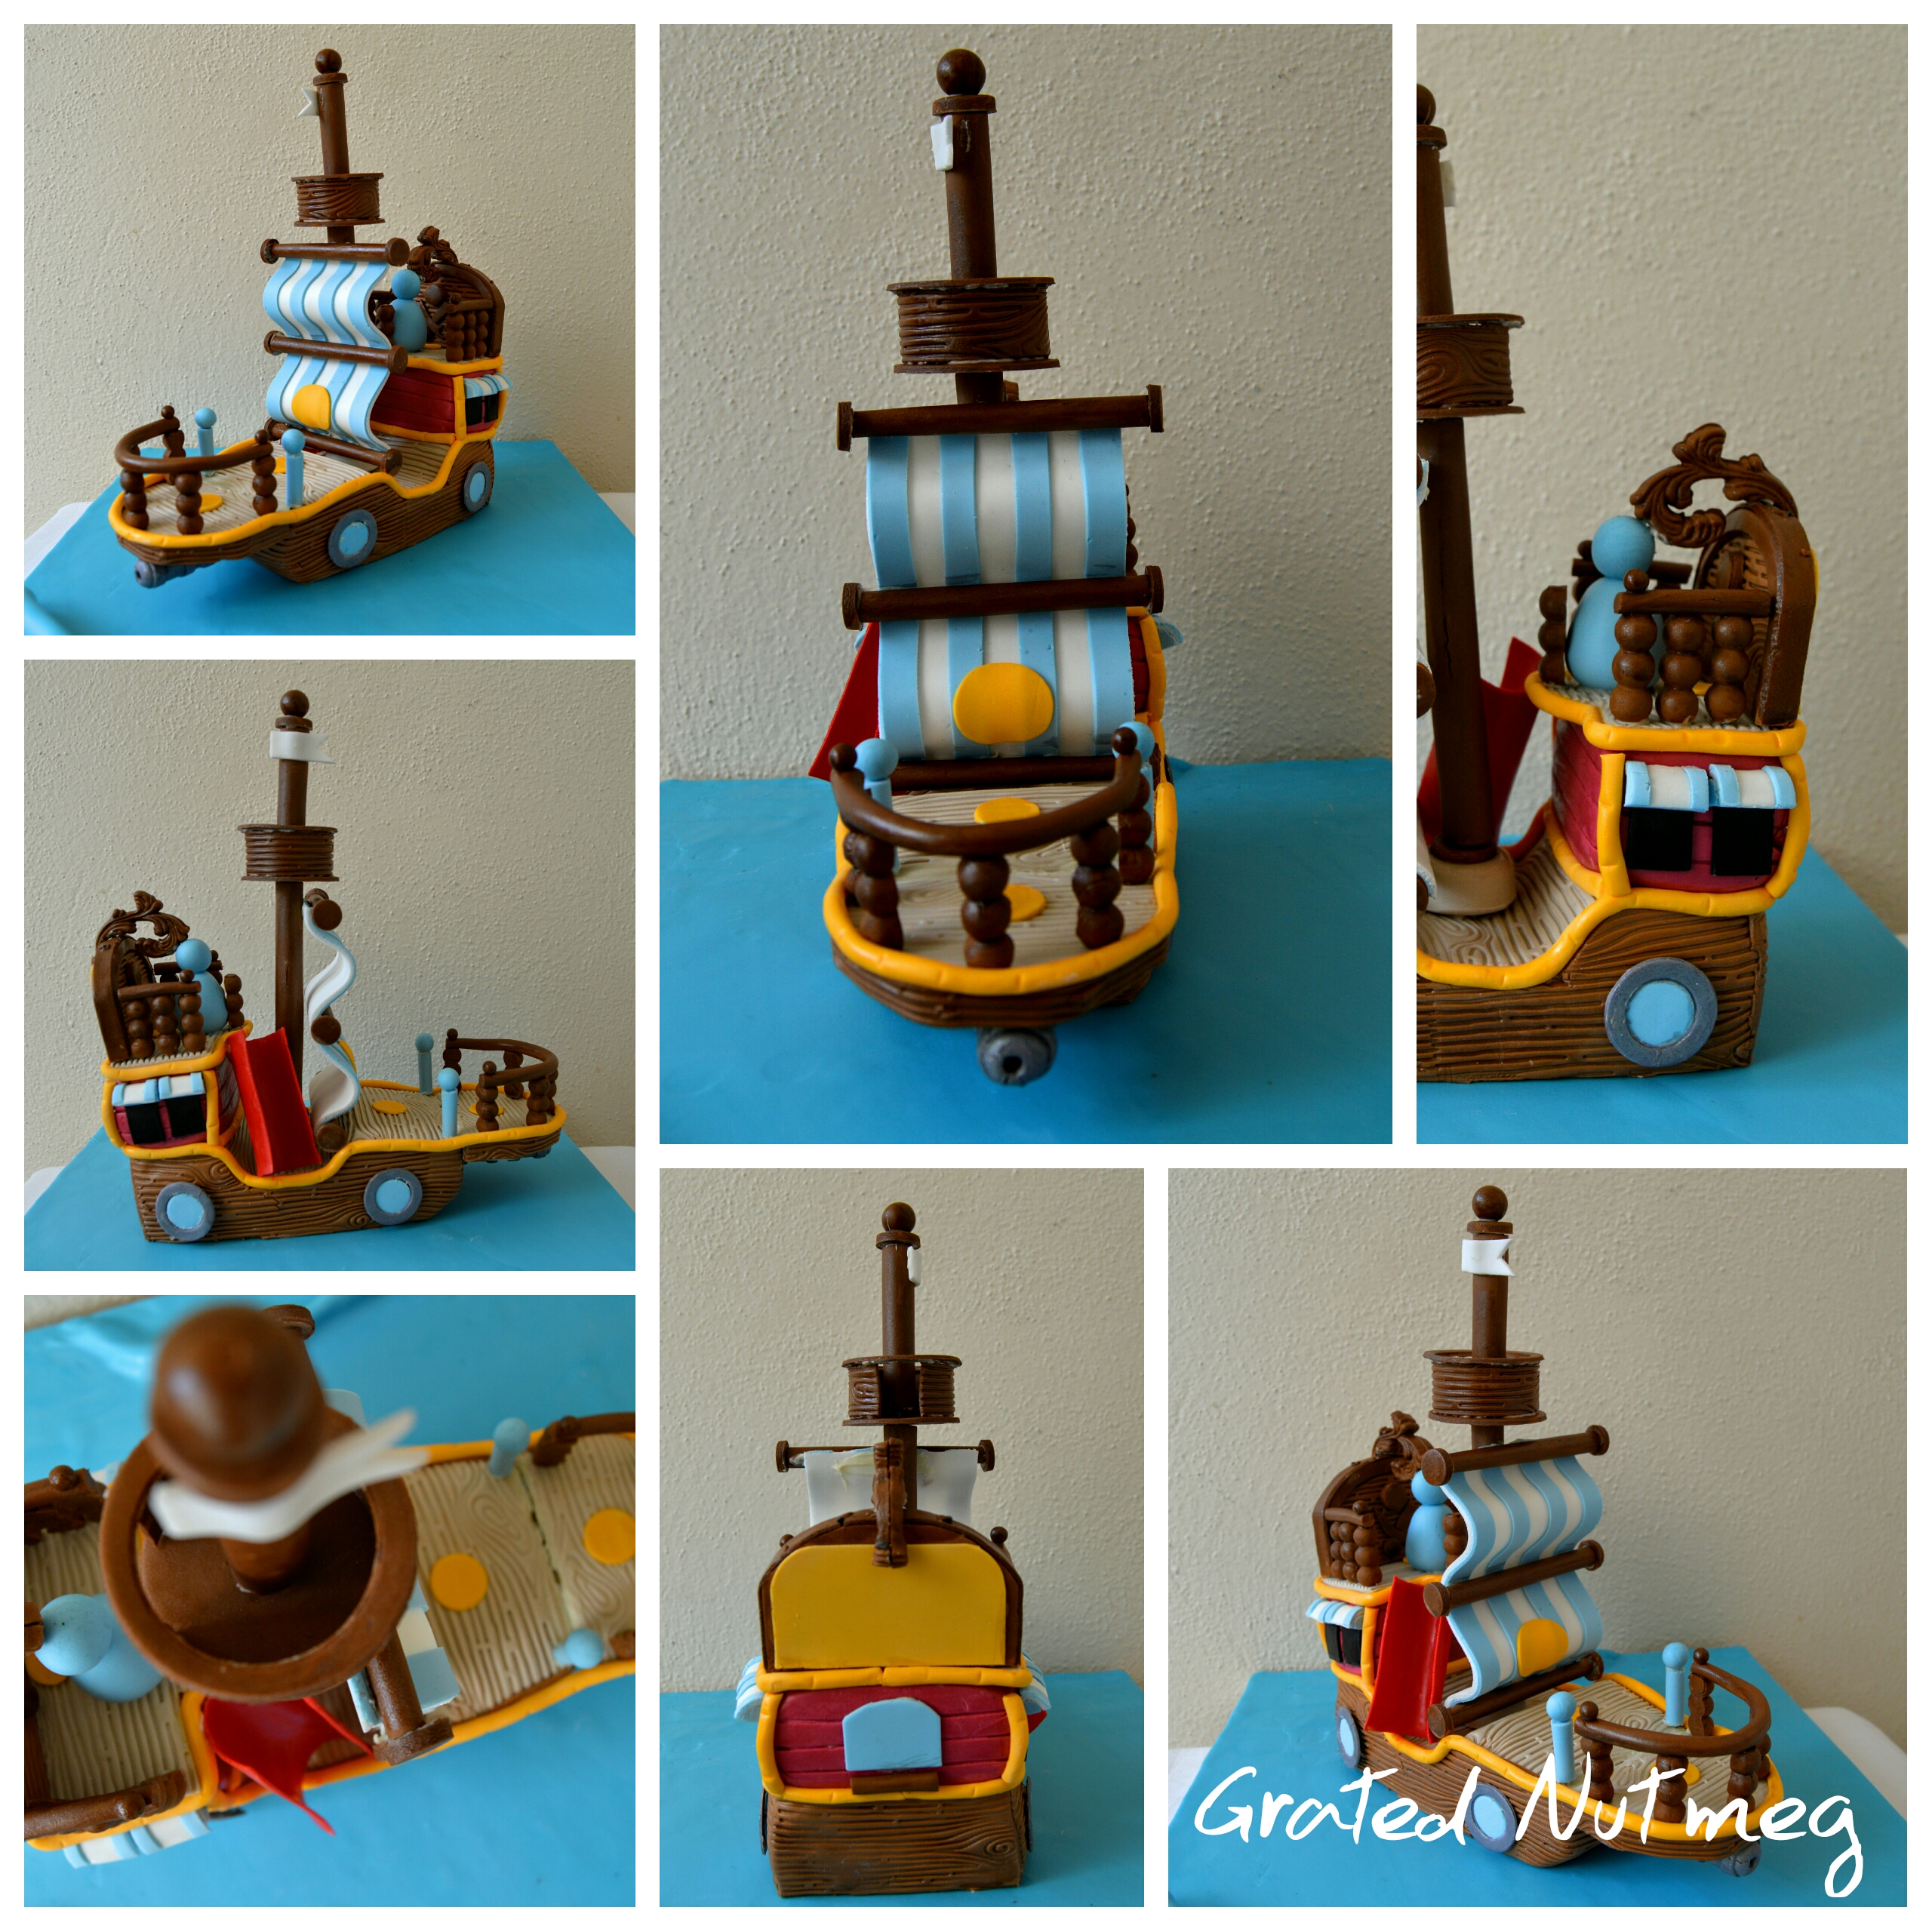 Fondant Ship Pictorial (Jake and the Neverland Pirates)